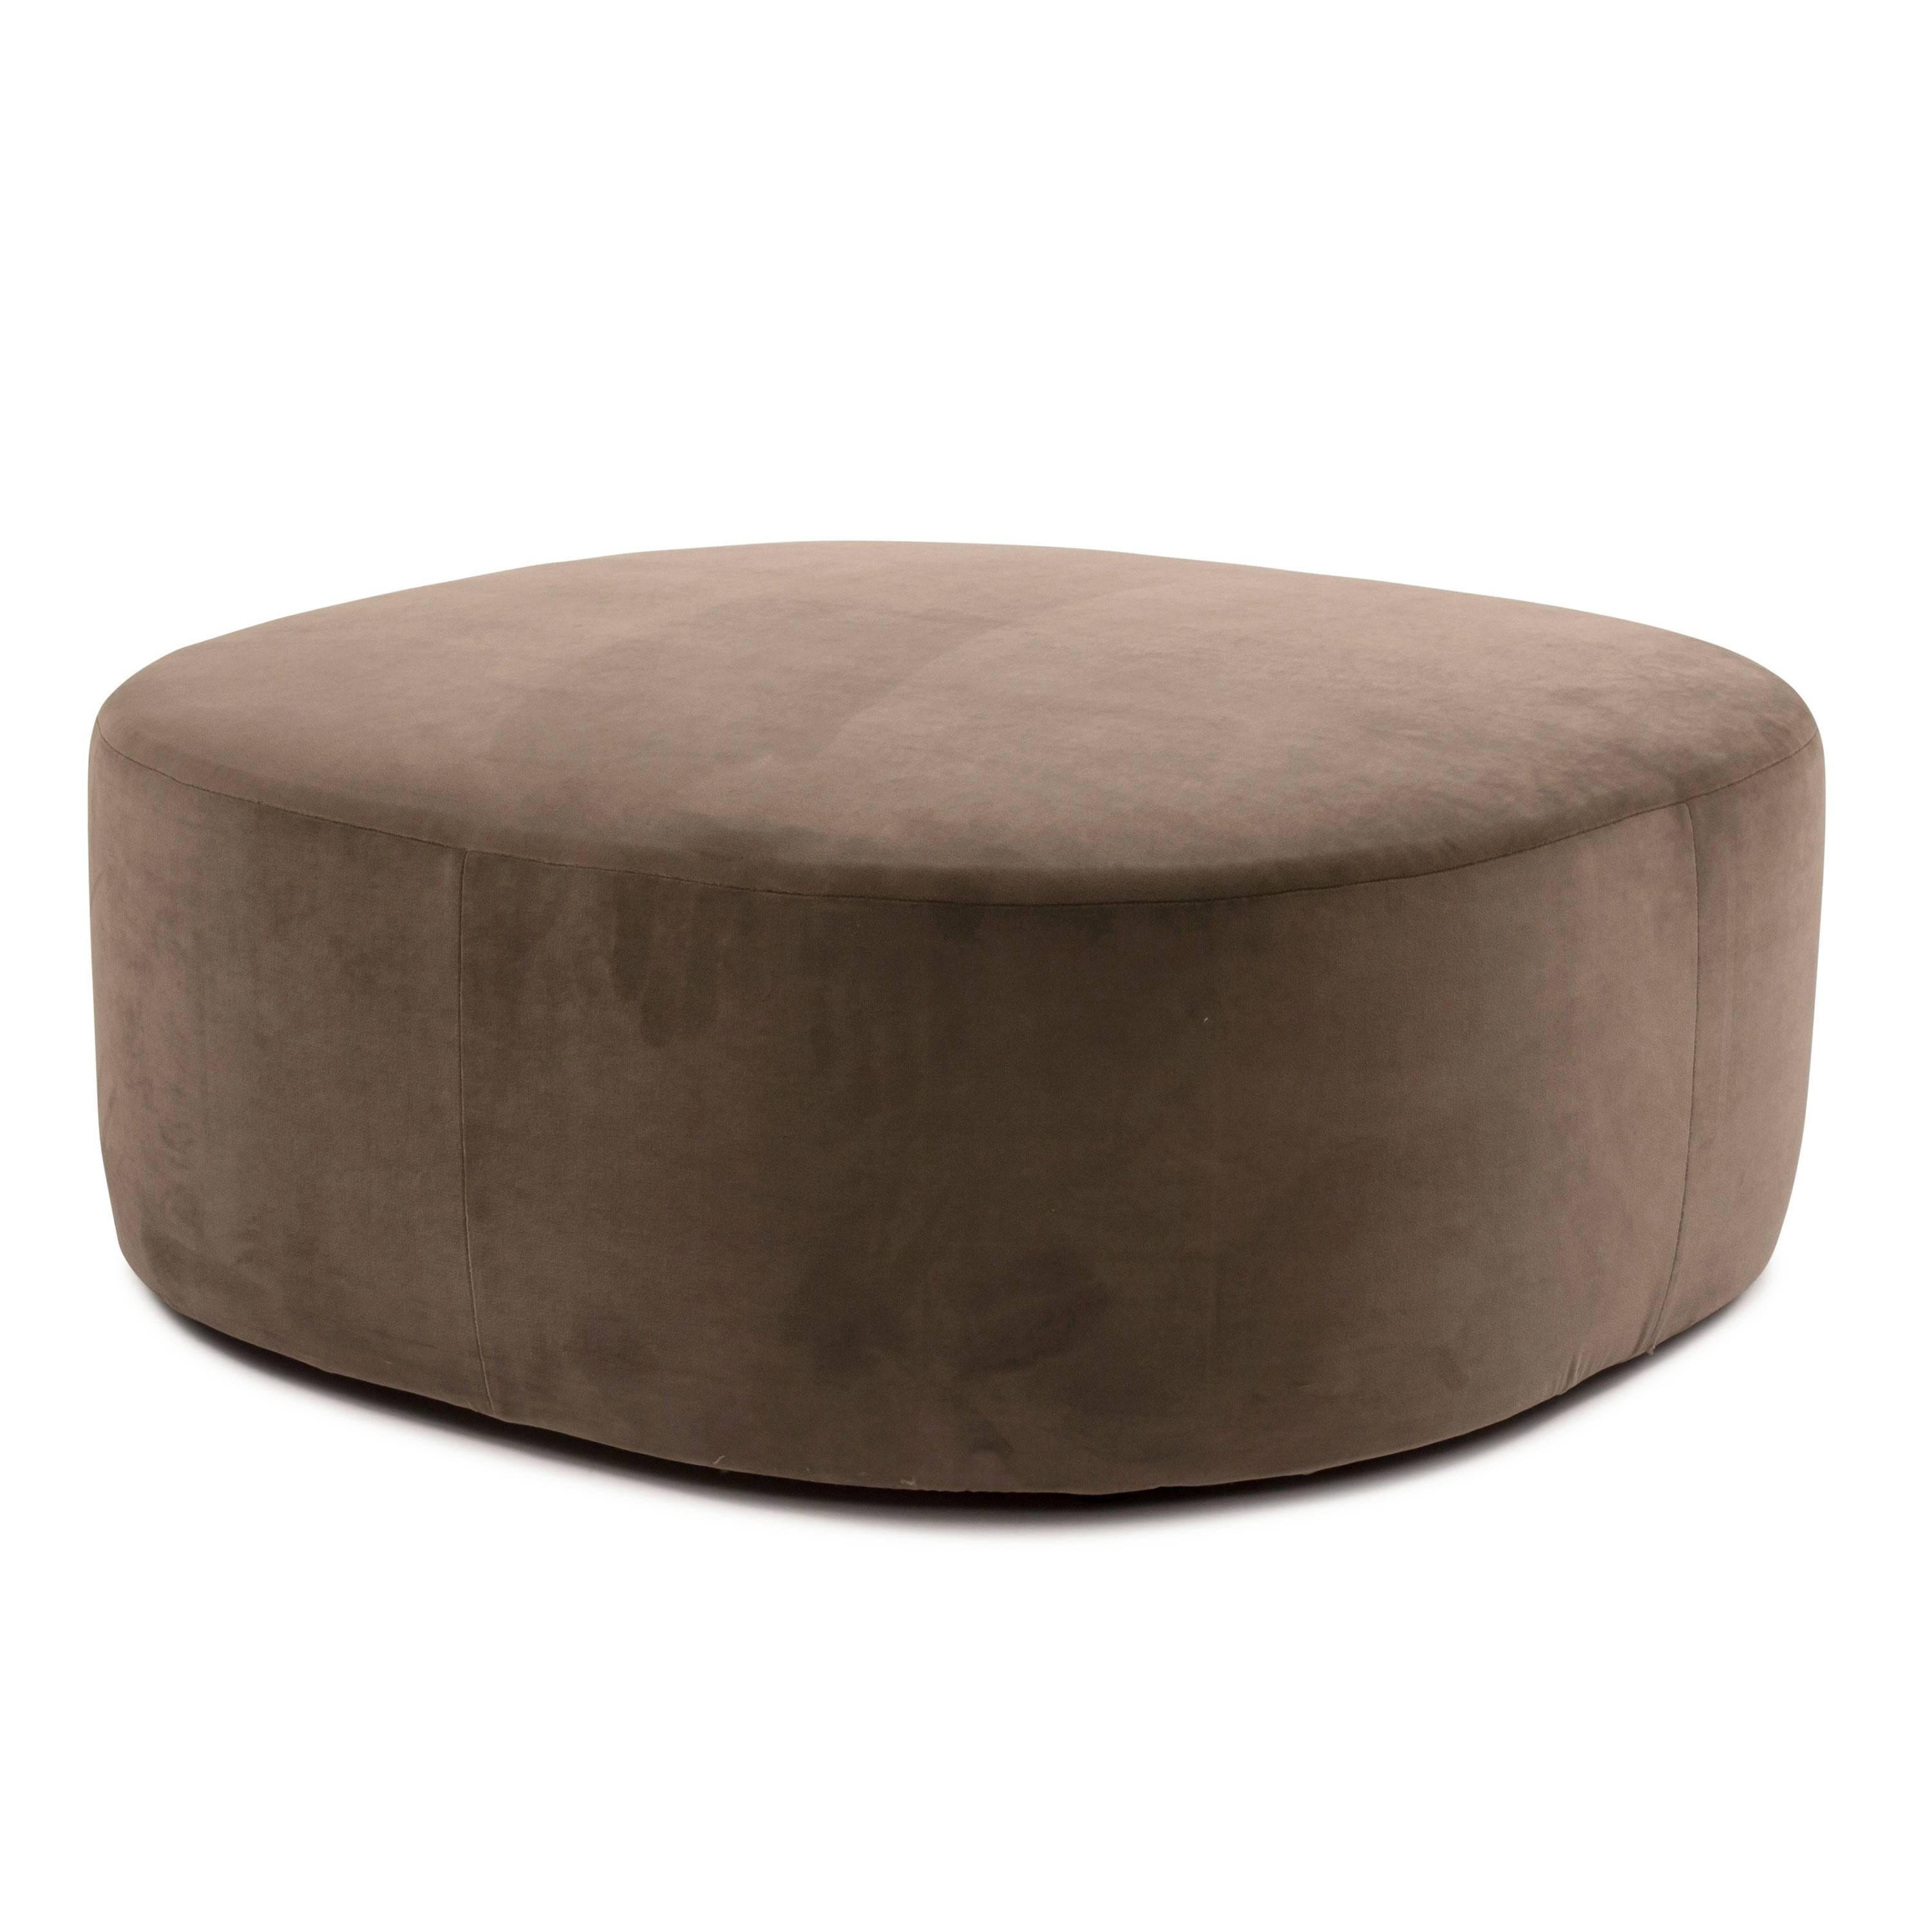 Designed by Nicola Gallizia to be inserted into each other, these poufs allow for multiple compositions.